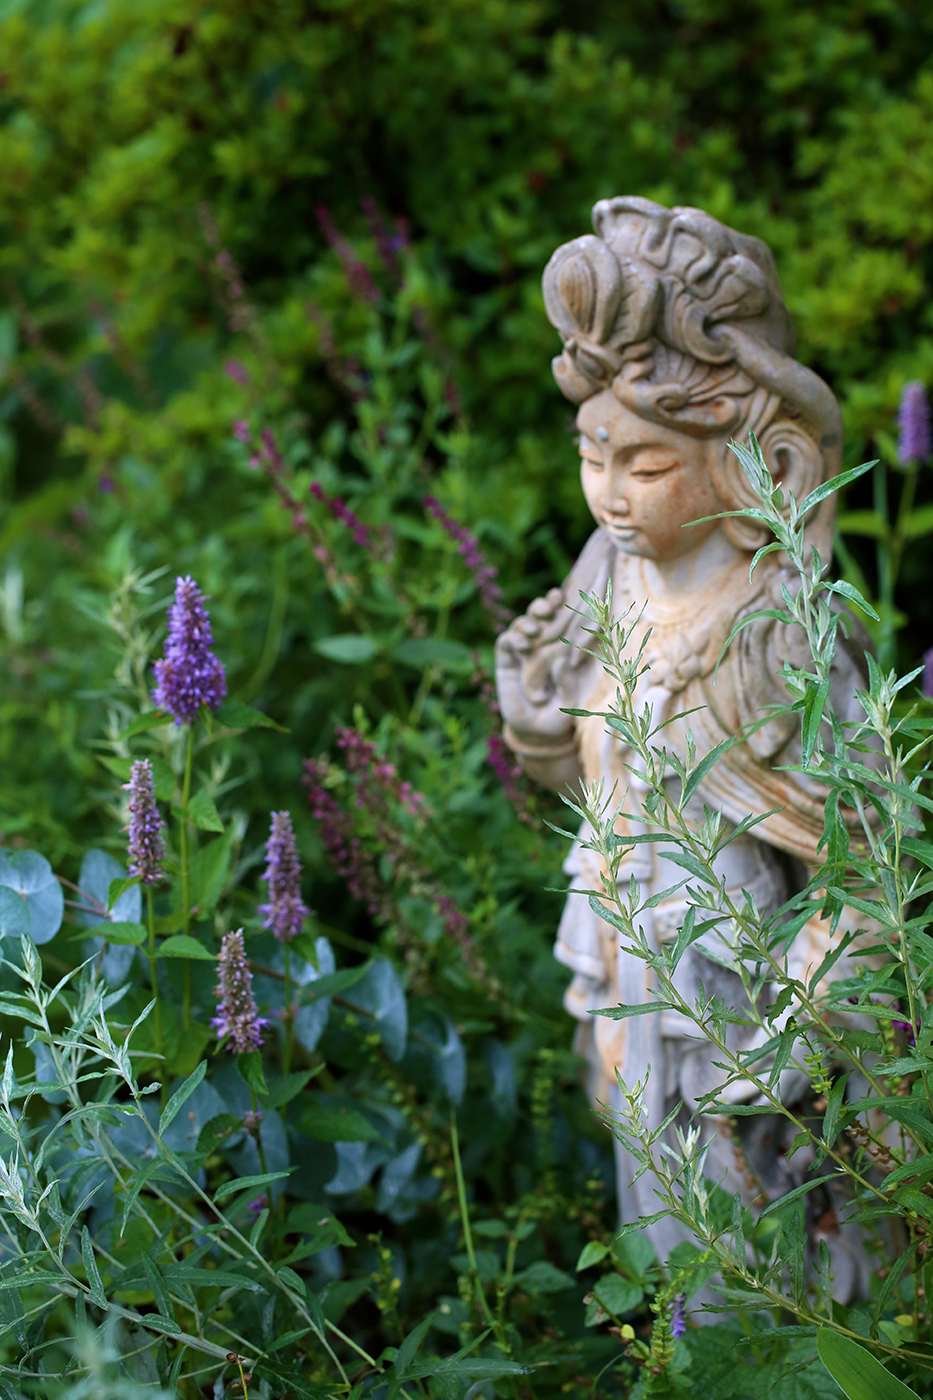 Aromatic garden with anise hyssop, eucalyptus, western mugwort and sweetfern.